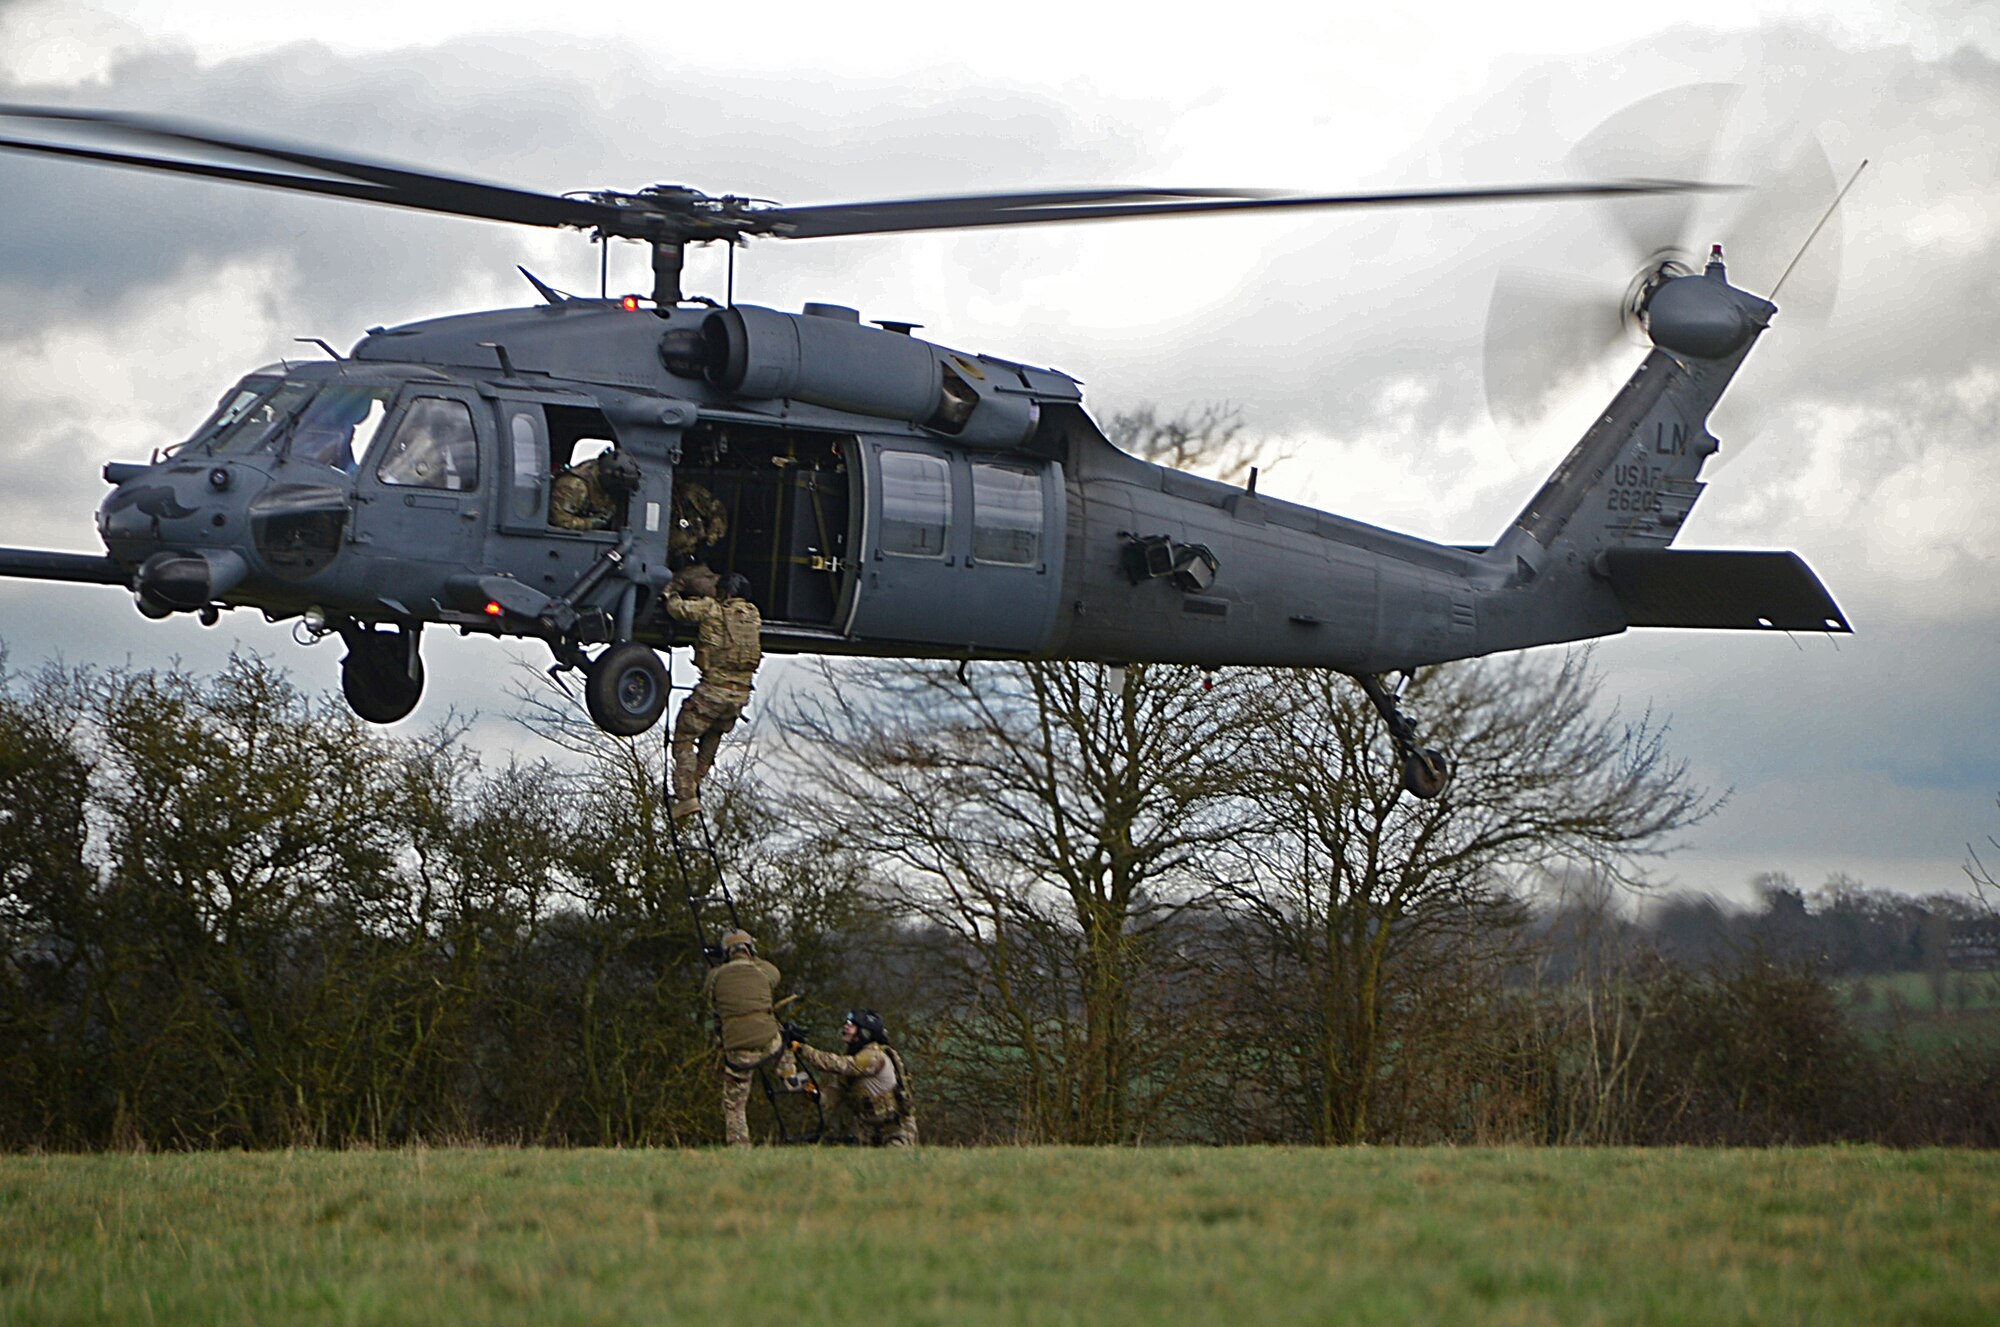 Pararescuemen assigned to the 57th Rescue Squadron climb into an HH-60G Pave Hawk during a combat search and rescue task force training exercise near Hinderclay, England, Feb. 4, 2016. The training simulated a downed pilot in a hostile environment that required employment of 56th and 57th RQS personnel for recovery assistance. (U.S. Air Force photo/Senior Airman Erin Trower)